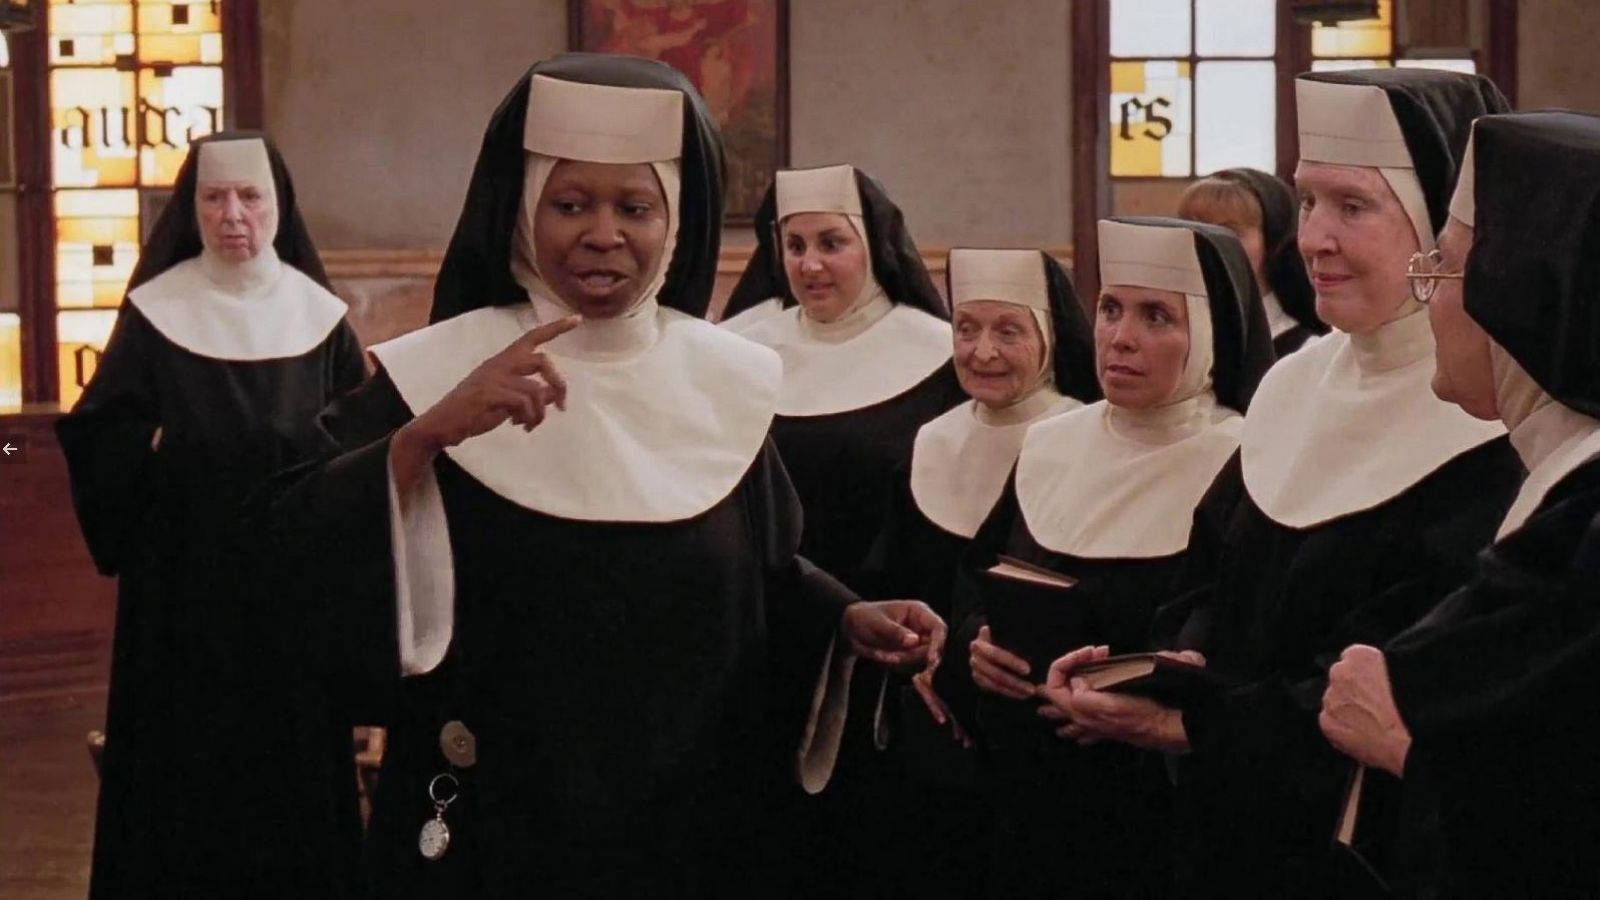 A moment of joy, a Nun enjoying her musical passion in Sister Act, 1992 Film. Wallpaper